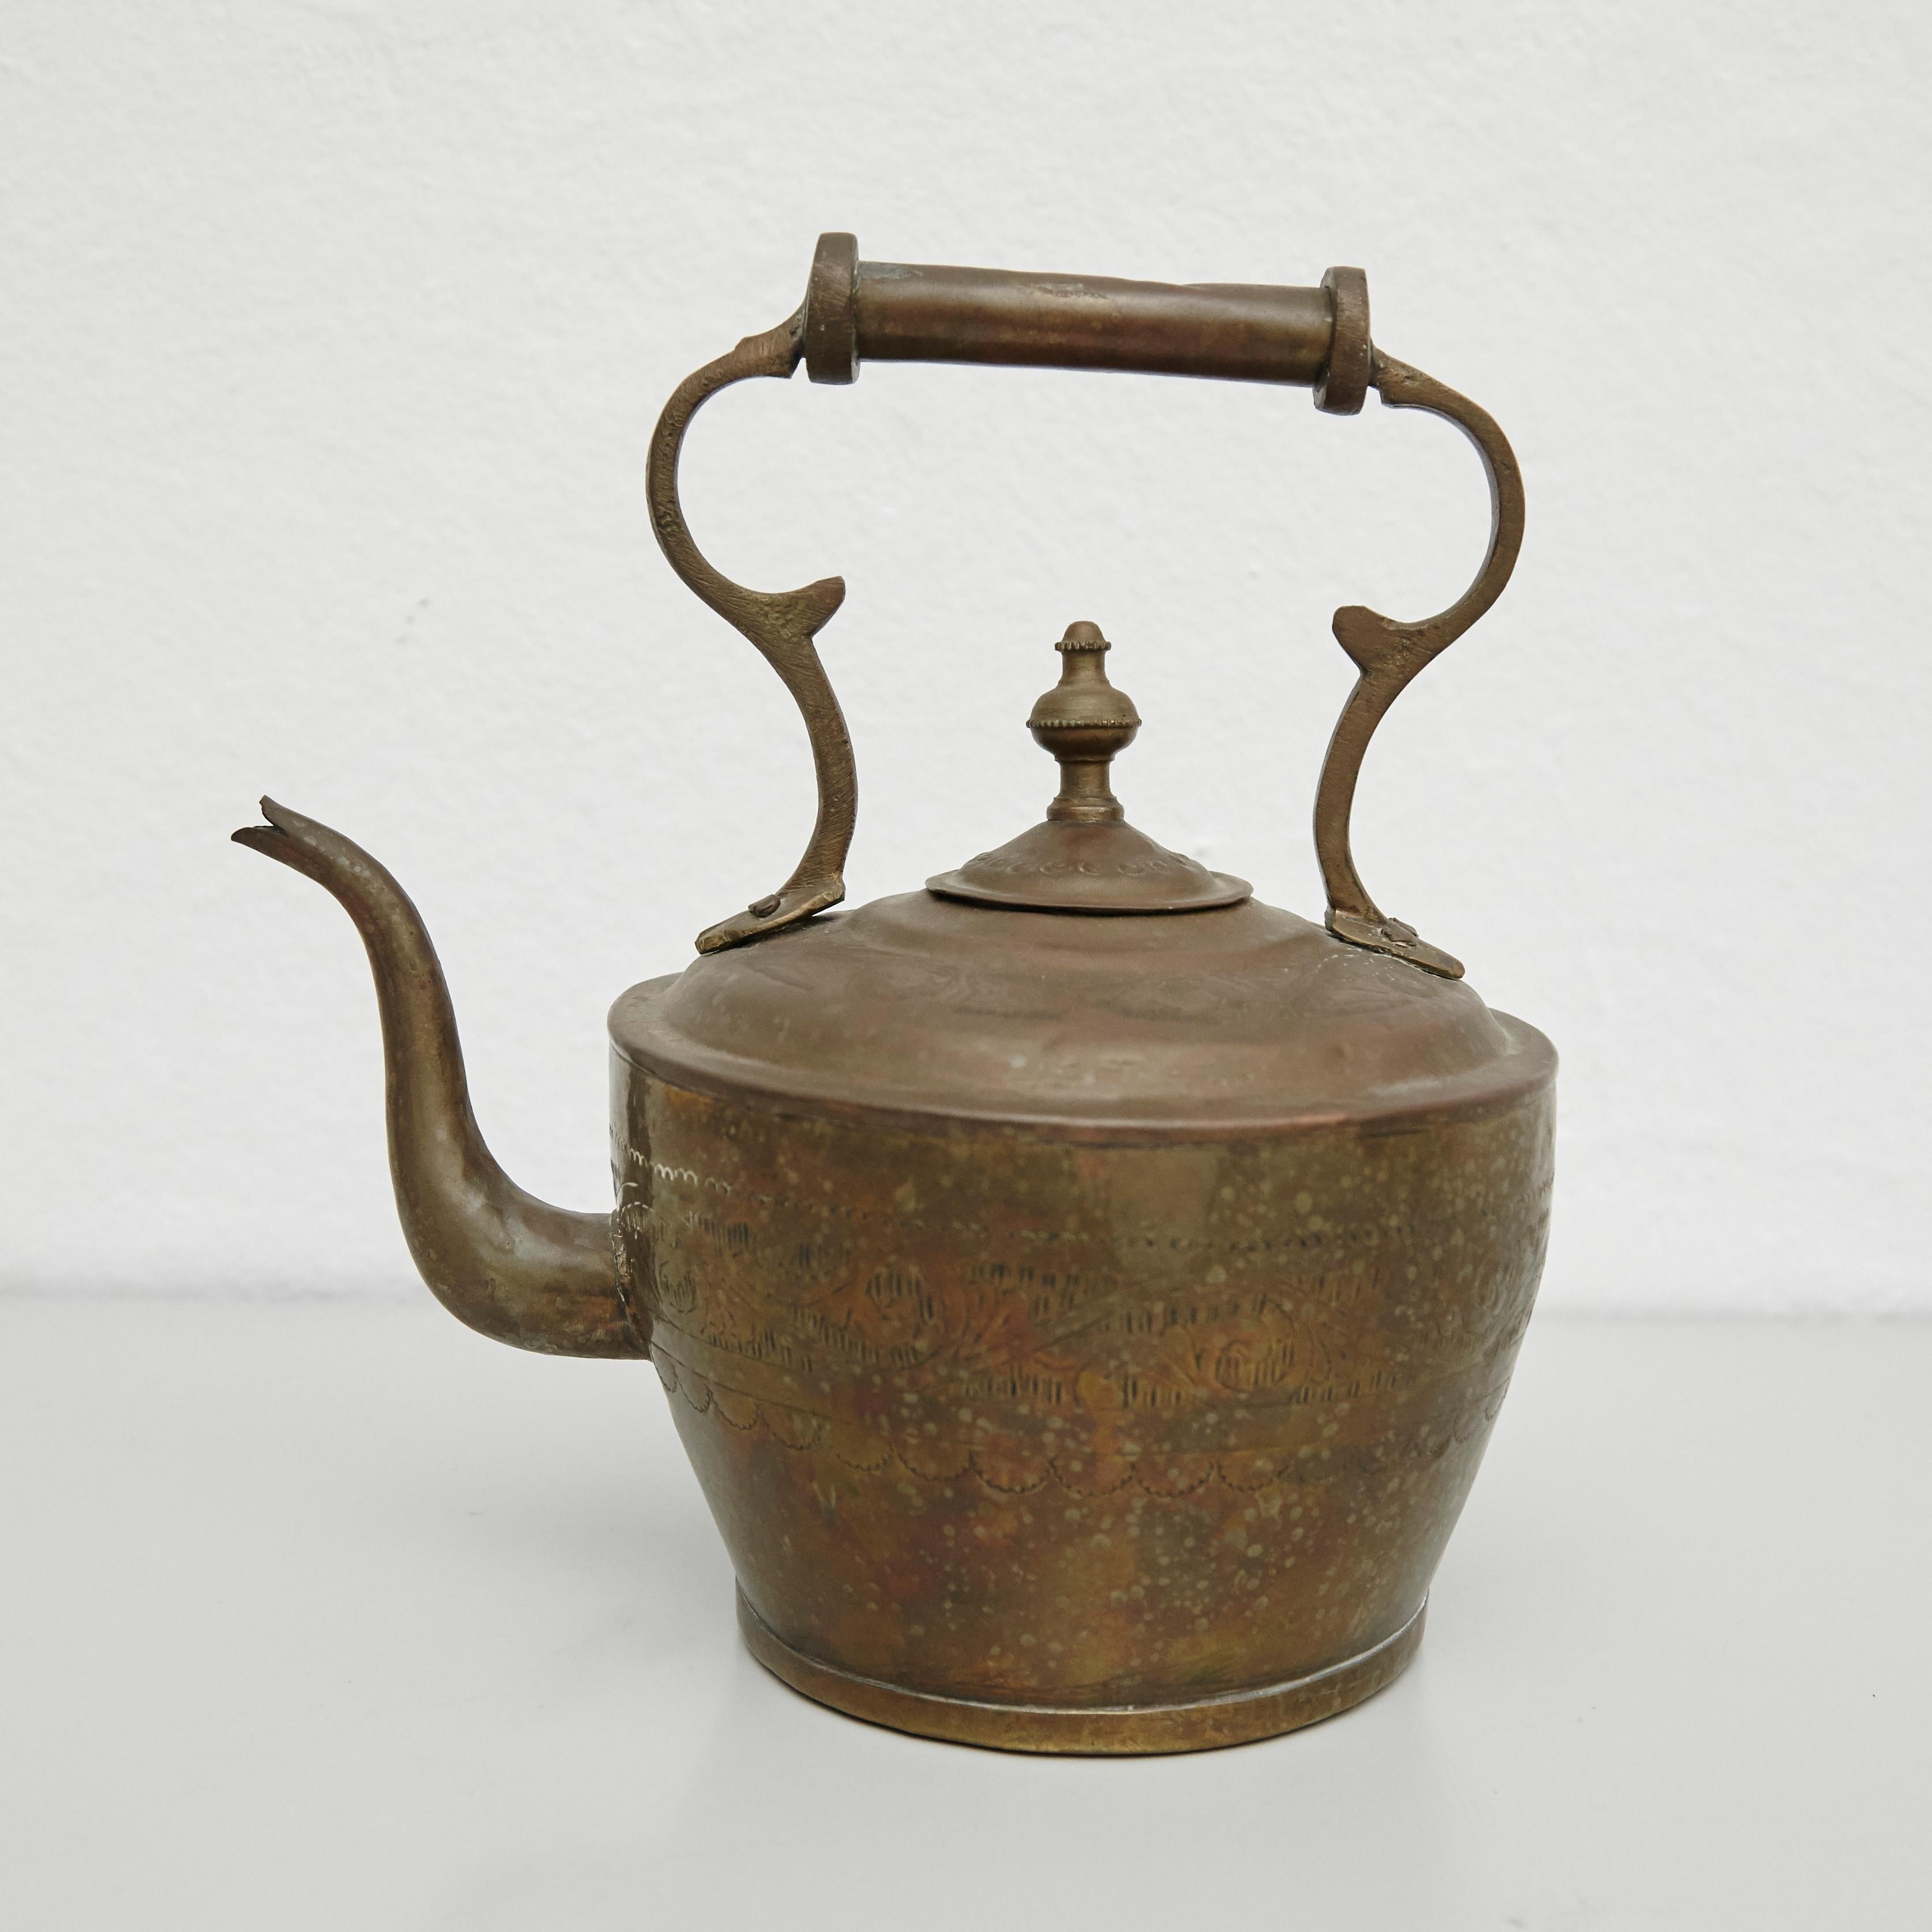 Early 20th century brass teapot.
By unknown manufacturer, France.

In original condition, with minor wear consistent with age and use, preserving a beautiful patina.

Materials:
Brass

Dimensions:
D 14 cm x W 24 cm x H 26.5 cm.